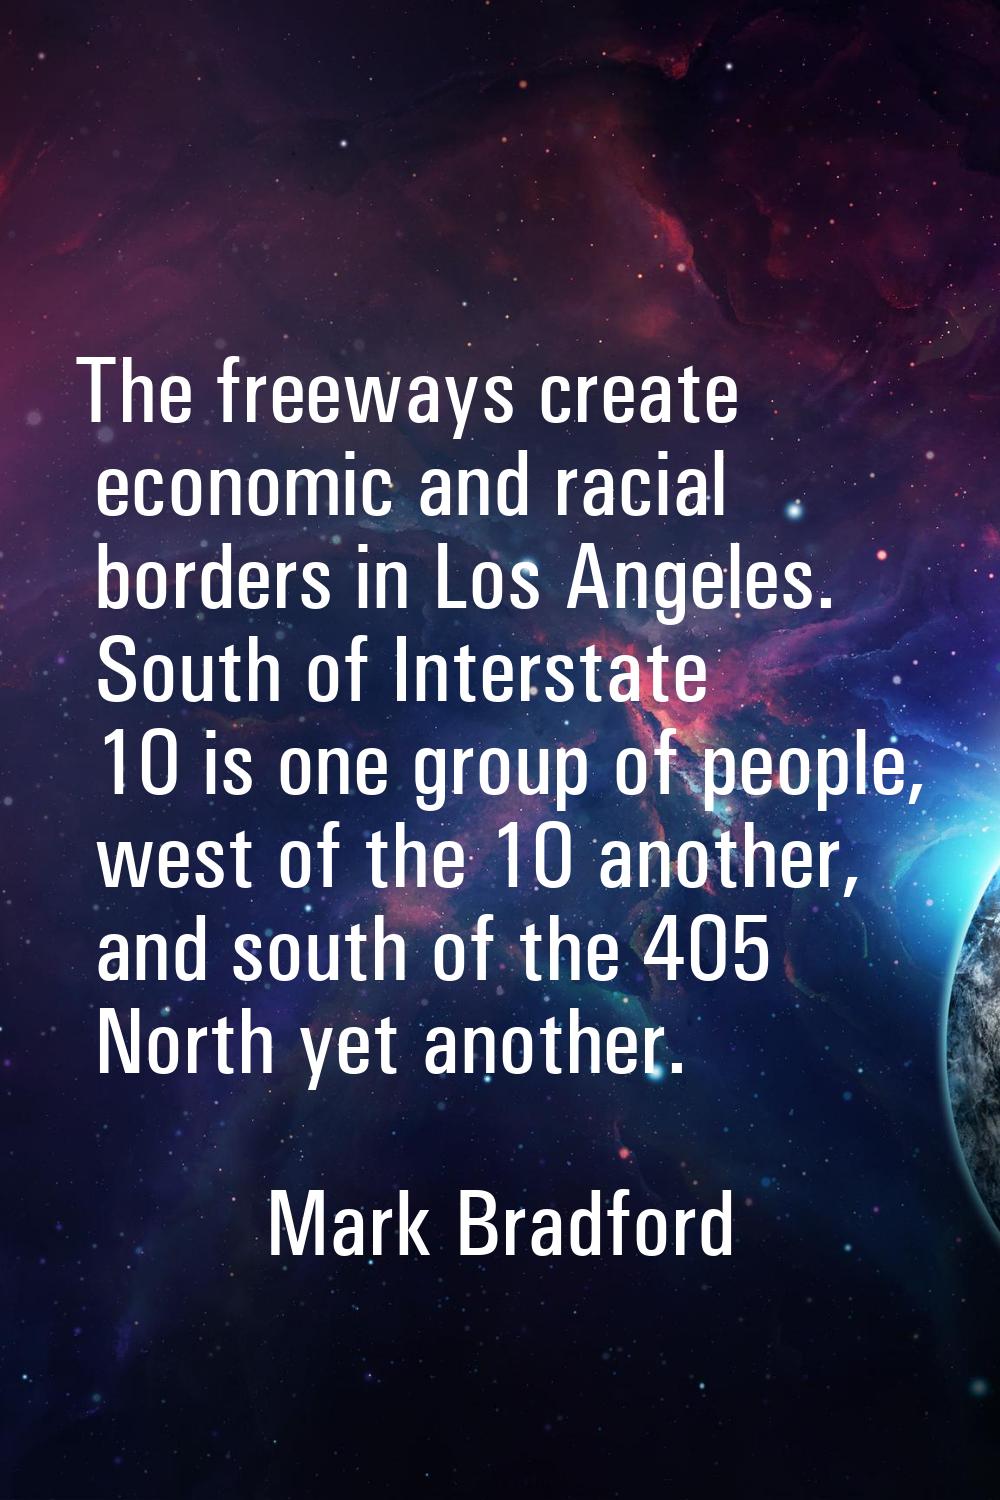 The freeways create economic and racial borders in Los Angeles. South of Interstate 10 is one group